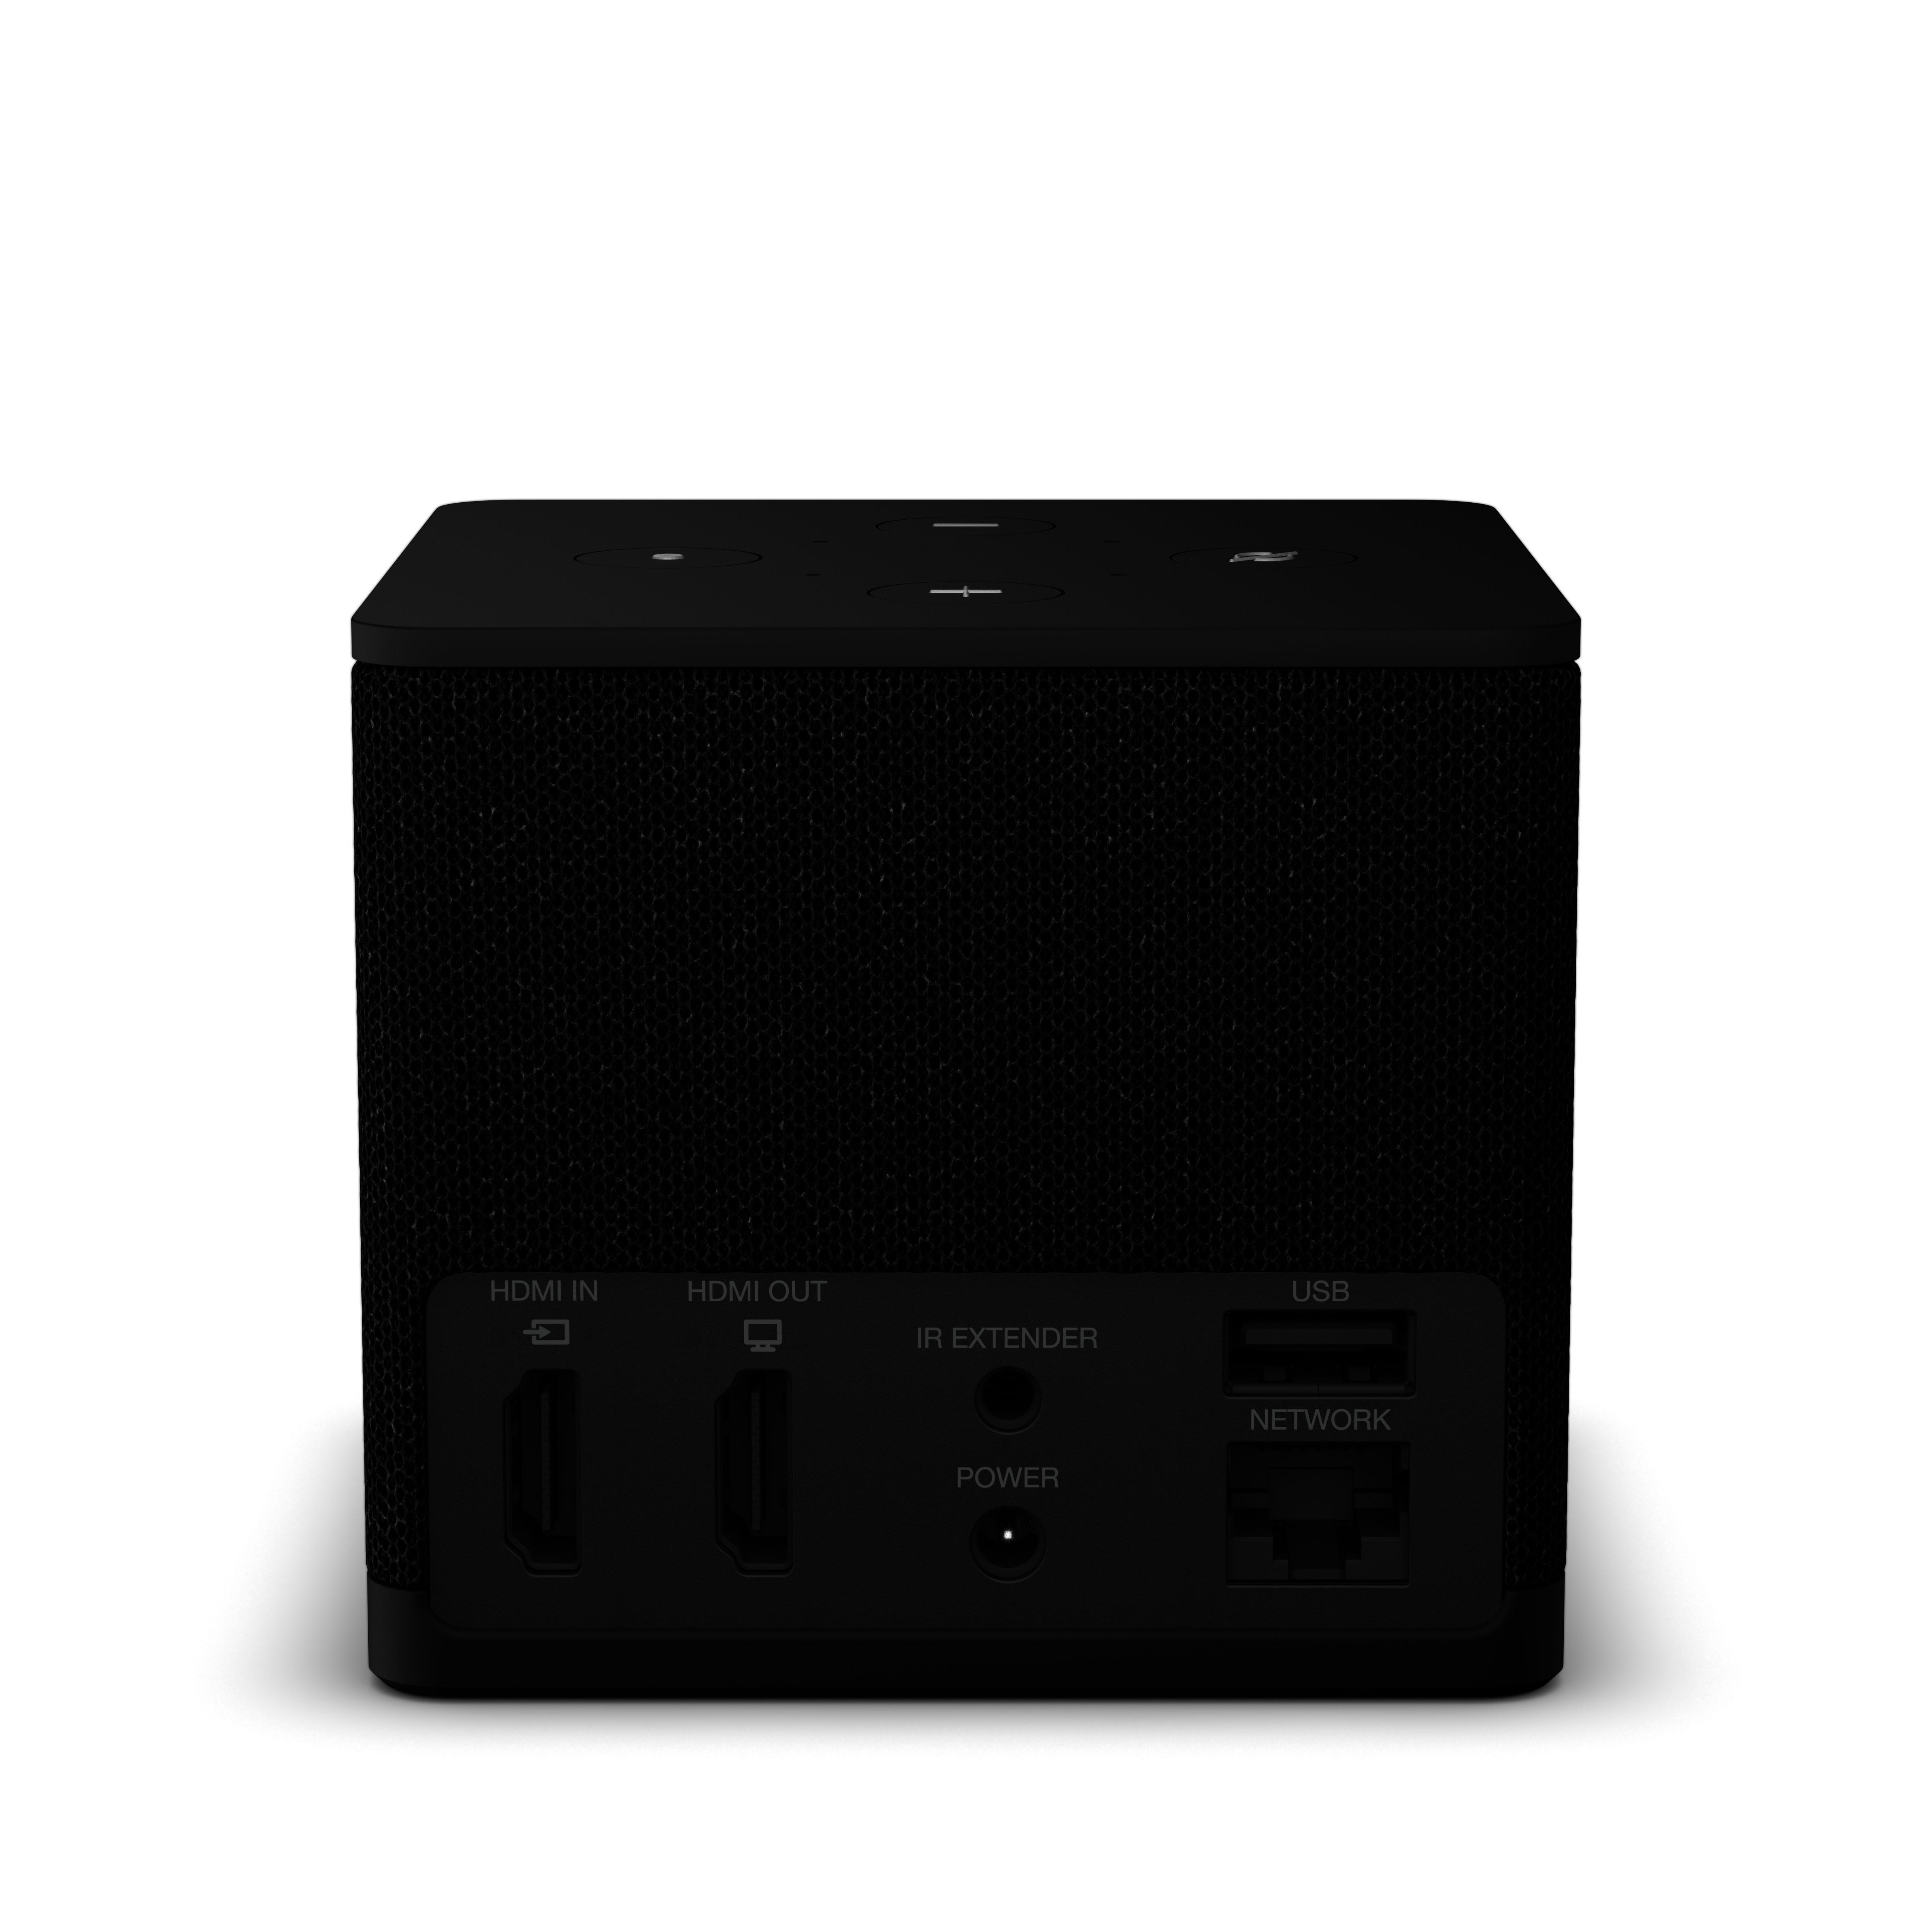 Tv Streaming Mediaplayer, Black Fire Cube AMAZON